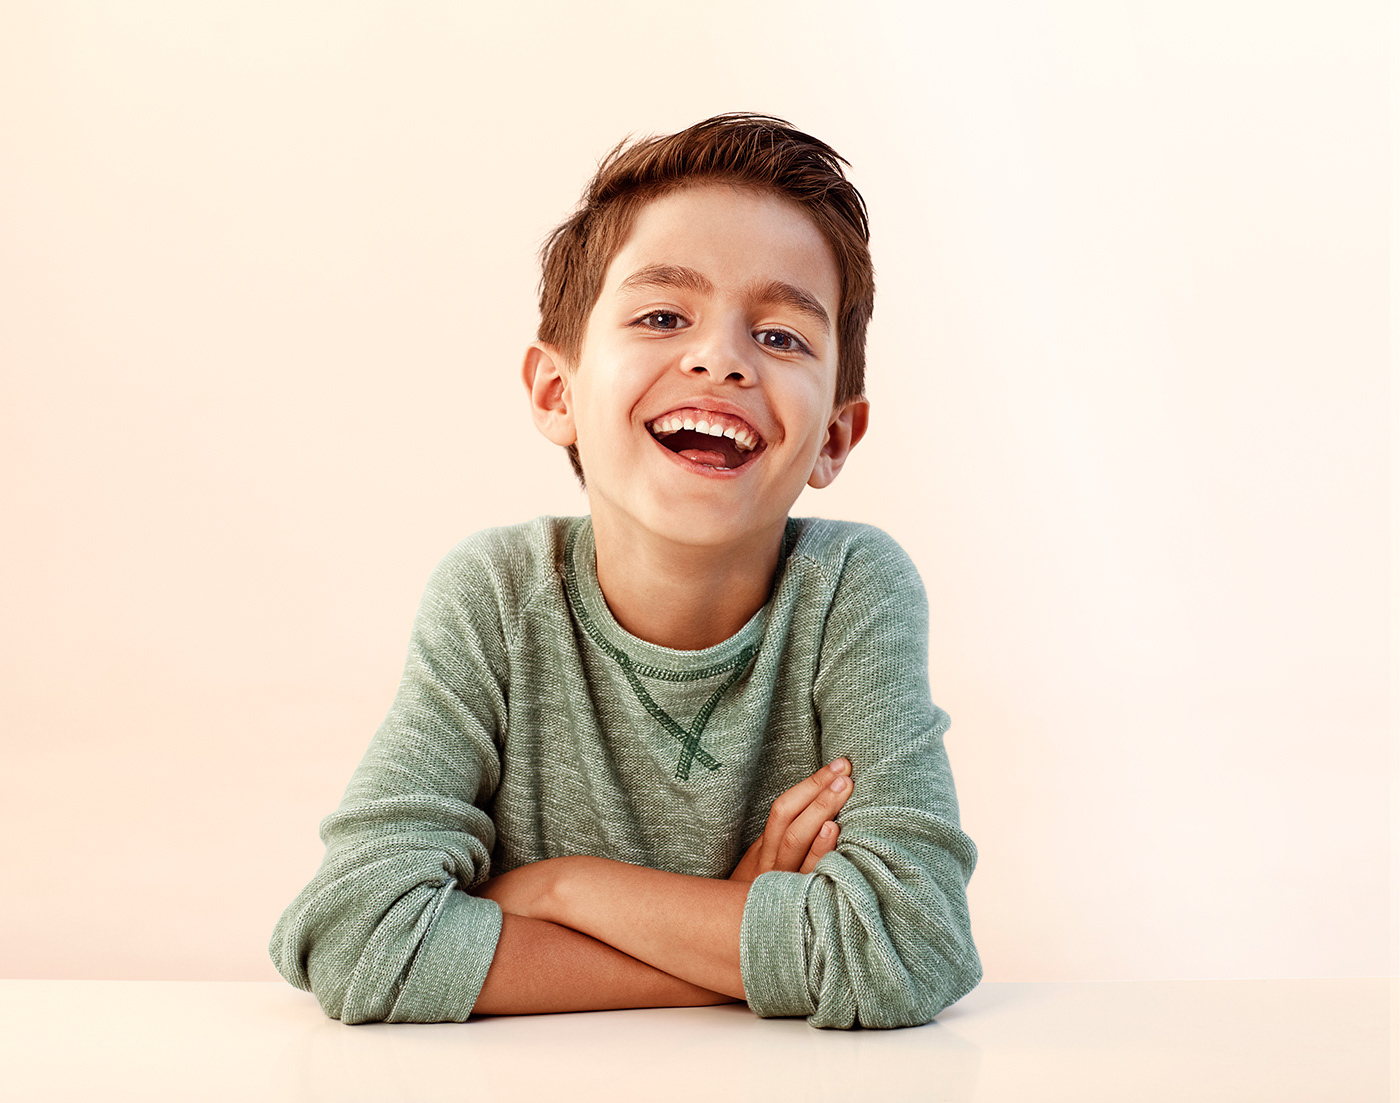 Laughing boy with brown eyes and hair in green shirt with arms crossed.